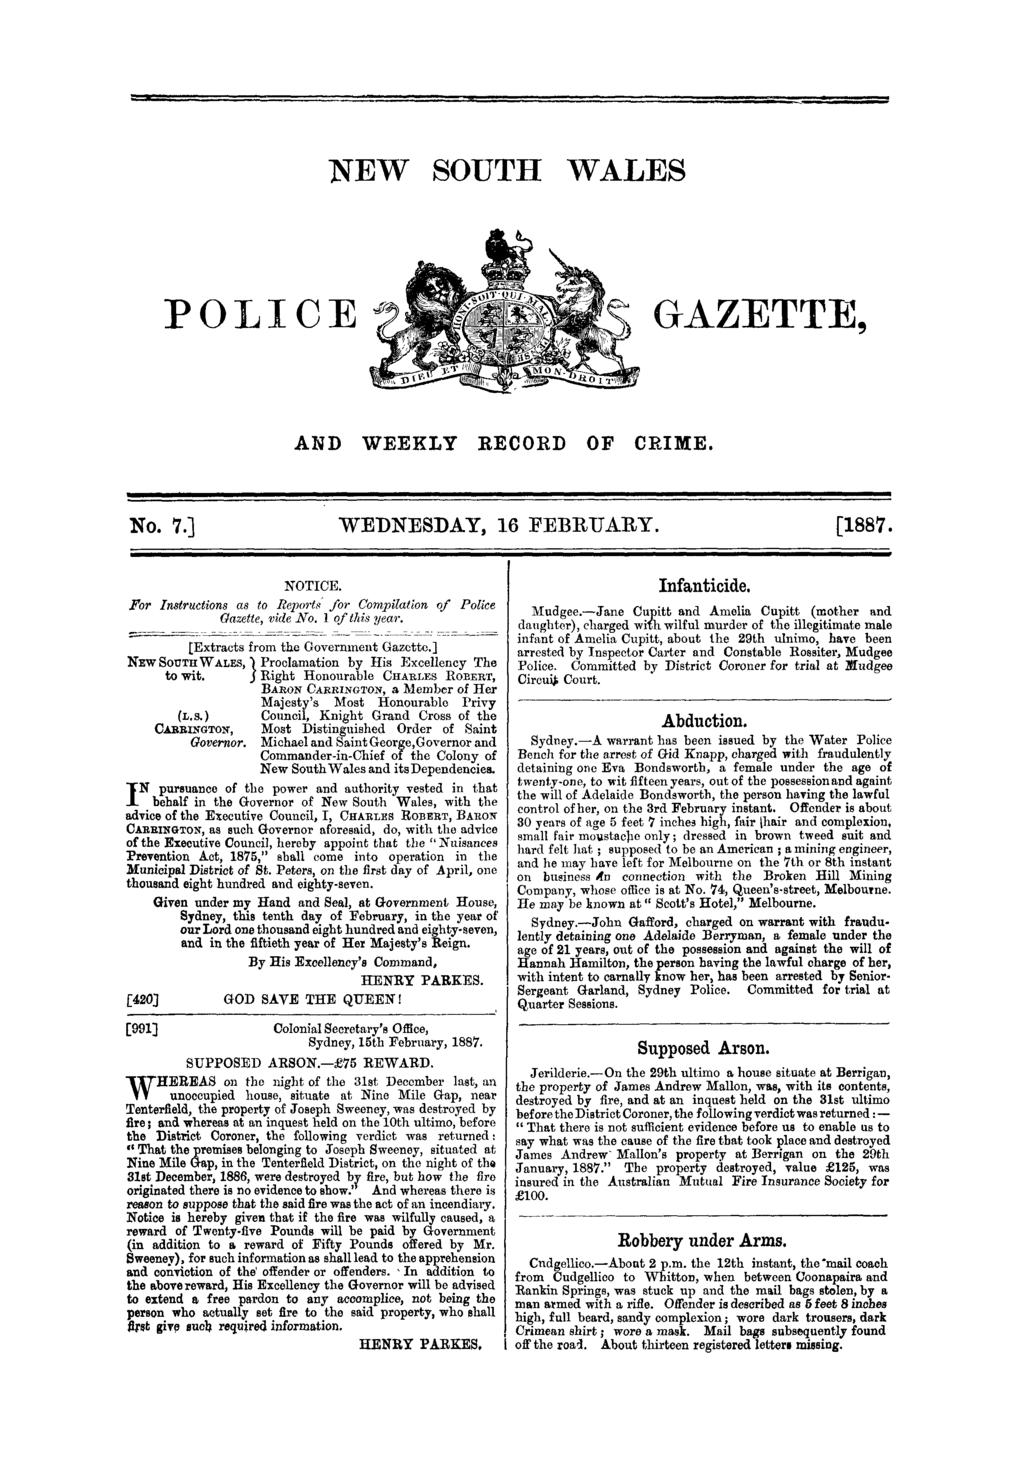 STEW SOUTH WALES POLICE I-r \..n,ic ' j;t ldllll I 110 $O 17!,:, Ir GAZETTE AND WEEKLY RECORD OF CRIME. No. 7.] WEDNESDAY, 16 FEBRUARY. [1887. NOTICE.